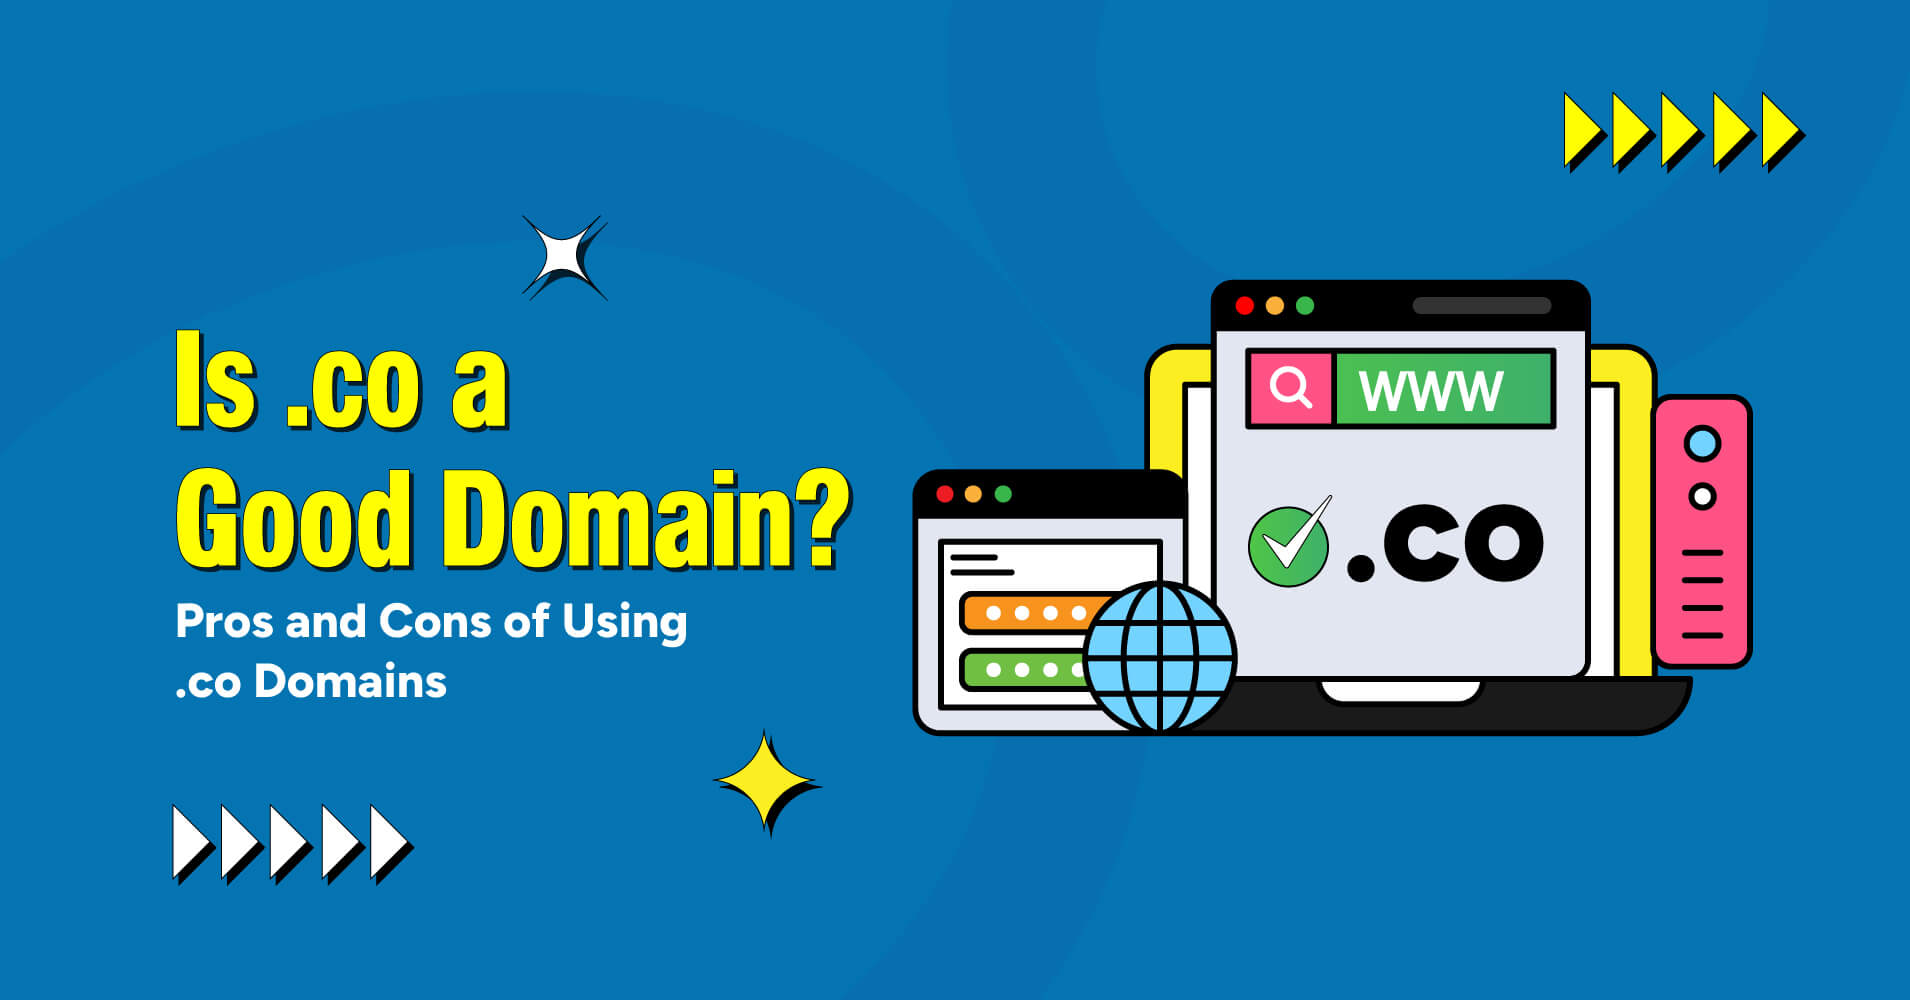 is .co a good domain? discover the pros and cons of using .co domains